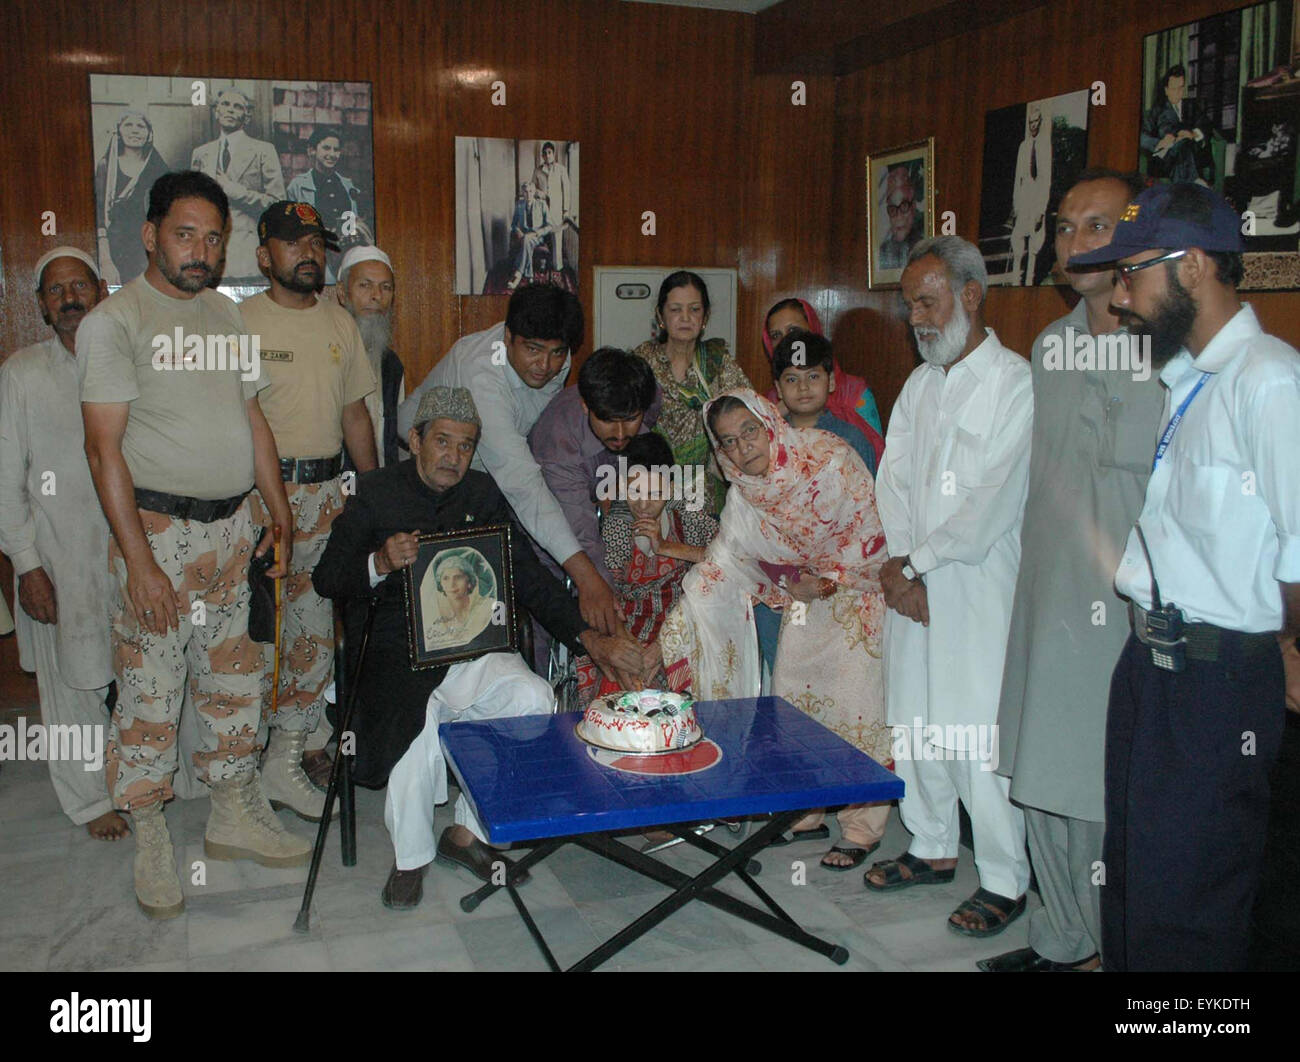 Jinnah Family members are cutting cake on the occasion of birthday anniversary of Fatima Jinnah, younger sister of Founder of Pakistan Quaid-e-Azam Muhammad Ali Jinnah, at Quaid's Mausoleum office in Karachi on Friday, July 31, 2015. Stock Photo